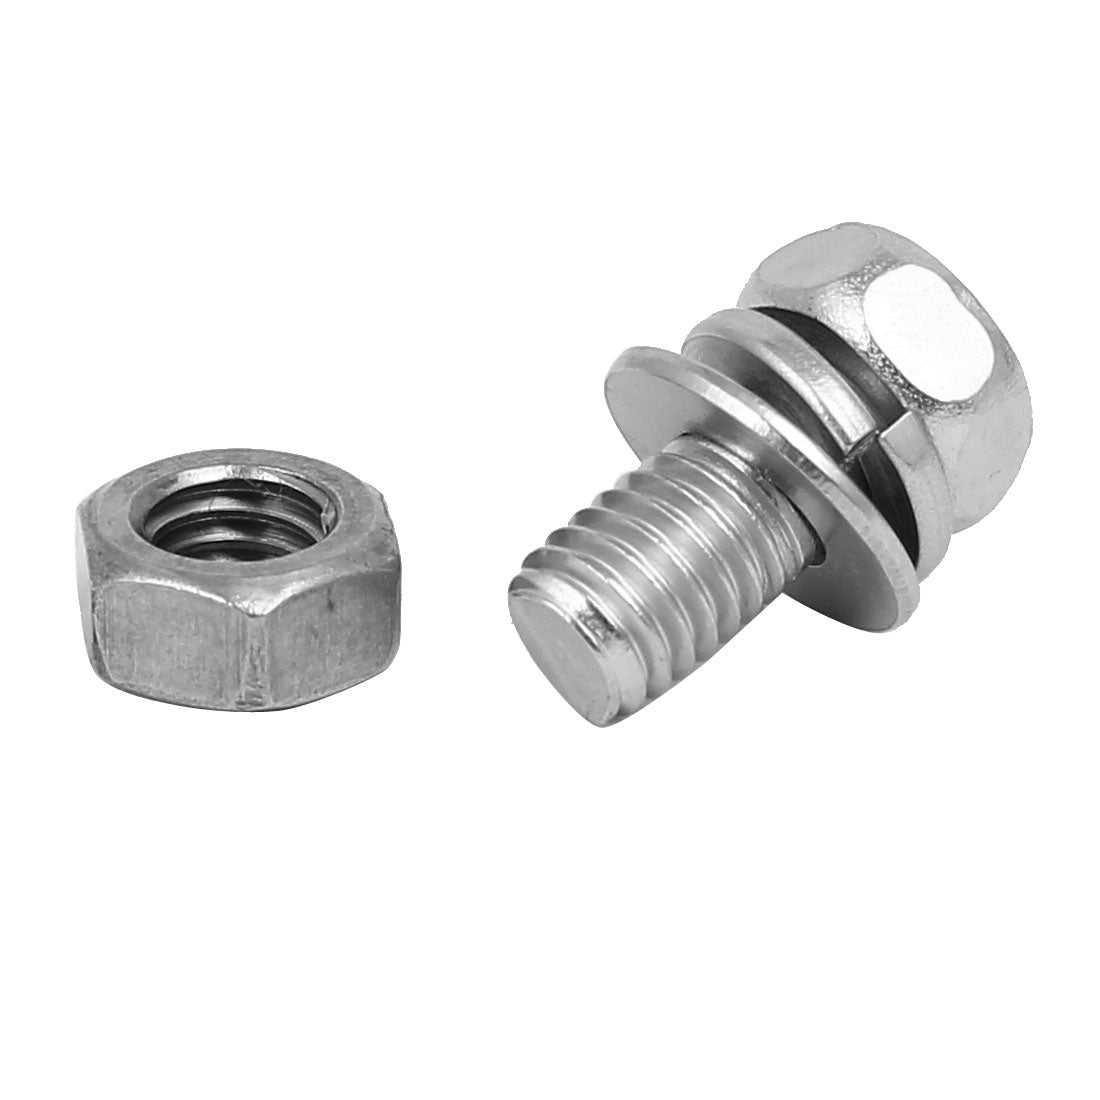 uxcell Uxcell M5 x 10mm 304 Stainless Steel Phillips Hex Head Bolts Nuts w Washers 20 Sets